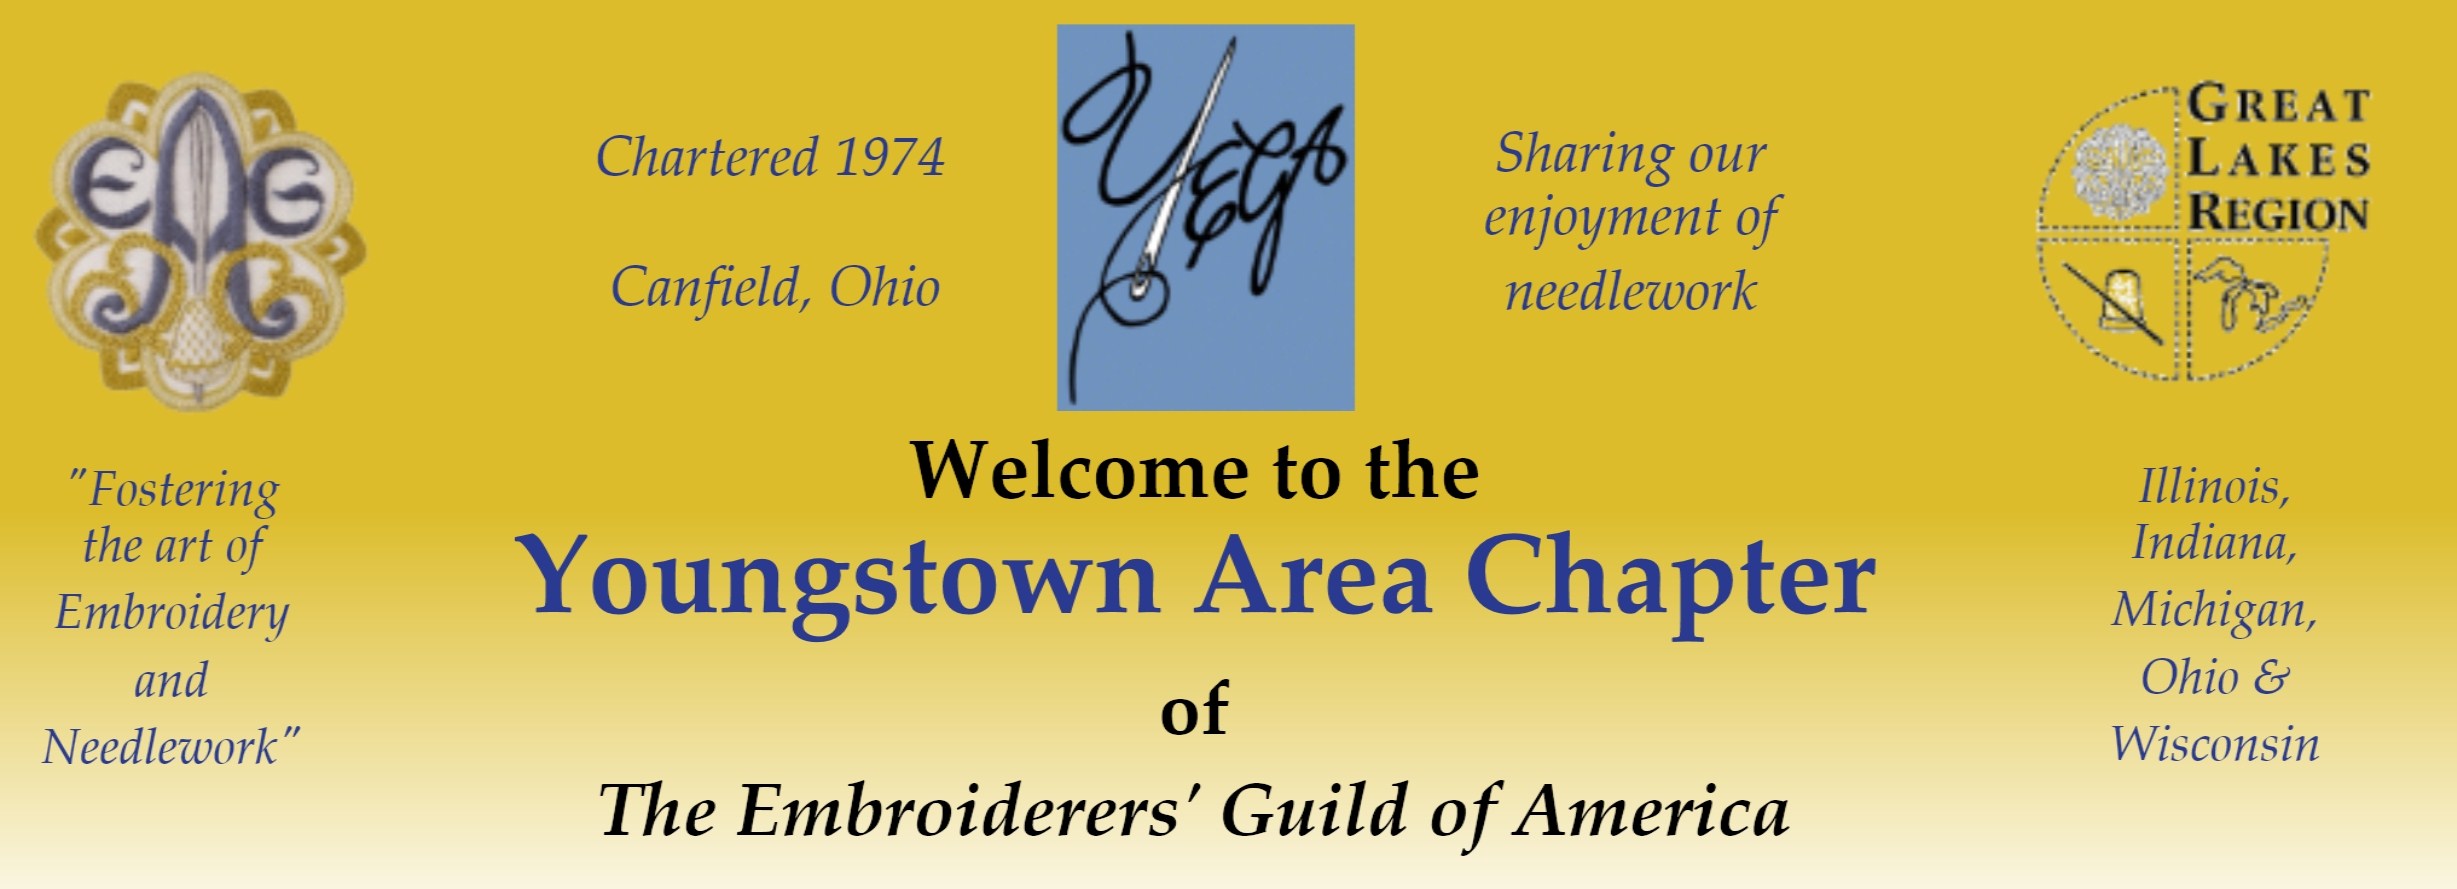 Welcome to the Youngstown Area Chapter
  of the Embroiderers' Guild of America